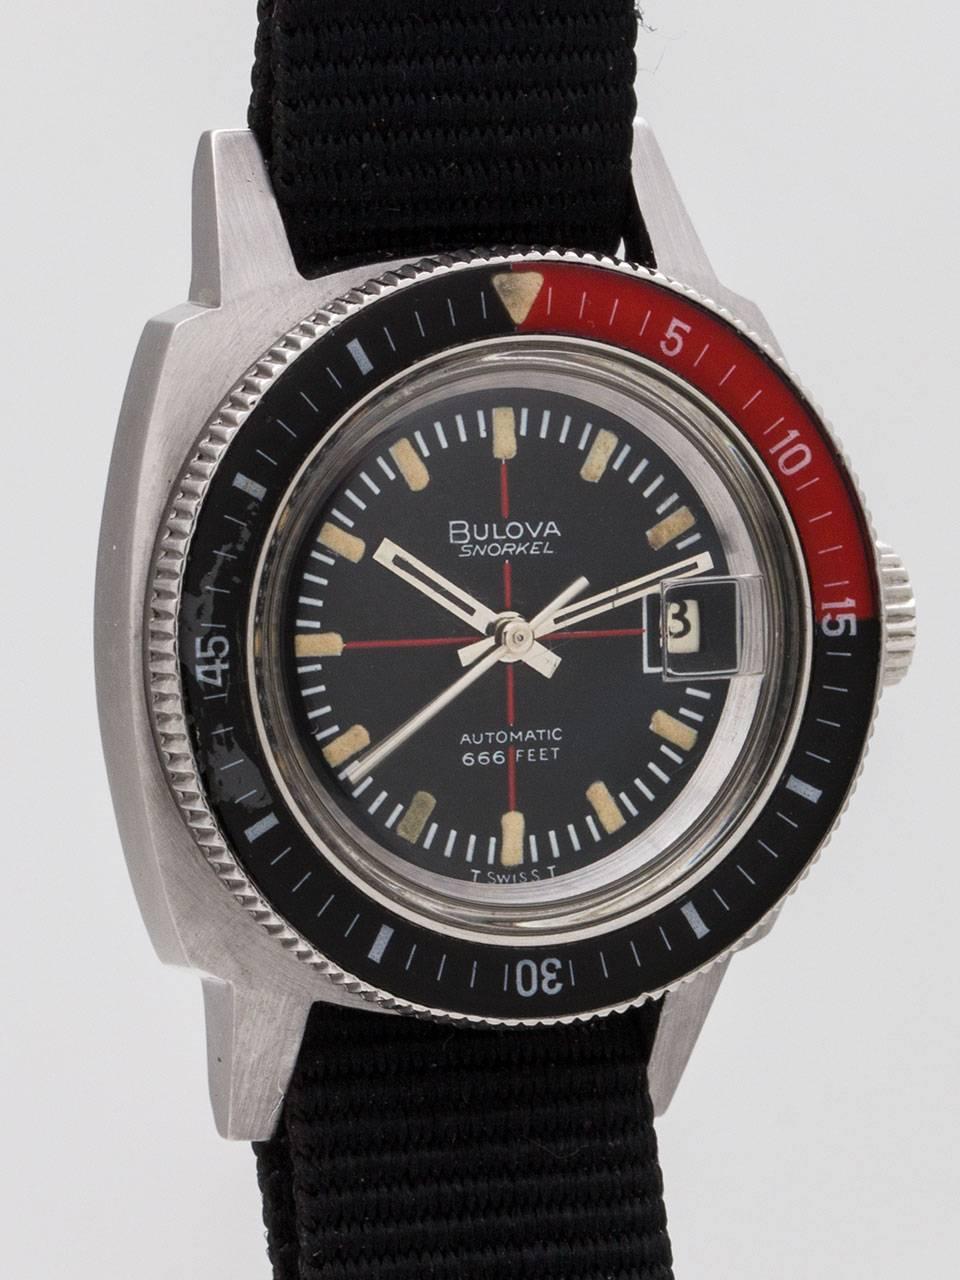 
Great looking and design vintage lady’s Bulova “Snorkel” diver’s model circa 1968. Featuring 26 x 34mm  cushion shaped case with screw down case back, with raised elapsed time brightly colored red and black rotating elapsed time bezel, original